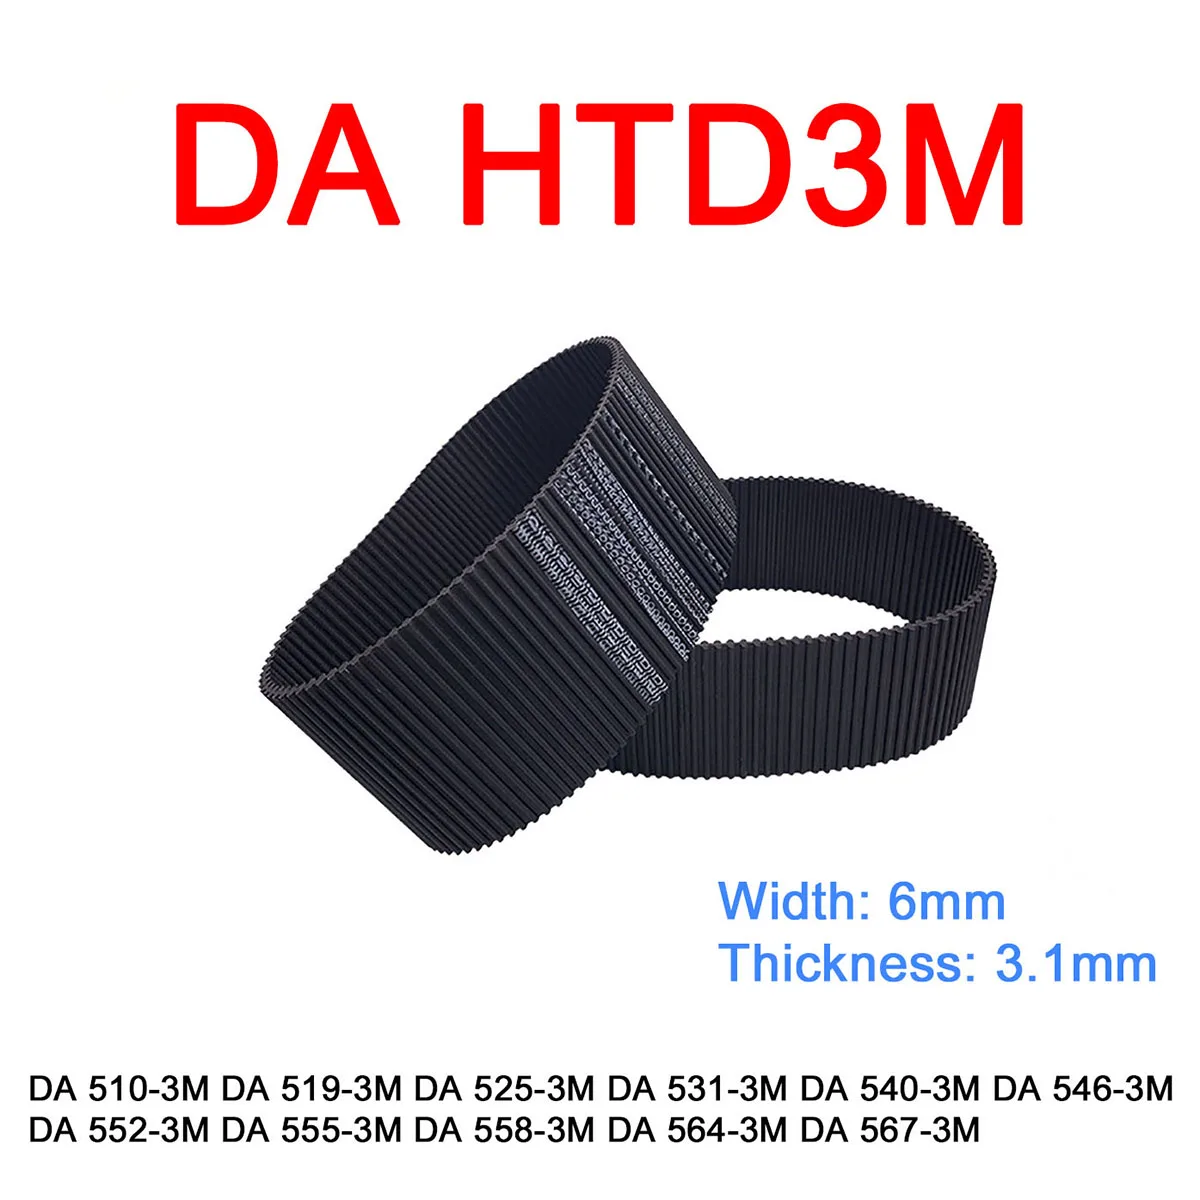 1Pc Width 6mm DA HTD 3M Rubber Arc Tooth Timing Belt Pitch Length 510 519 525 531 540 546 552 555 558 564 567mm Synchronous Belt